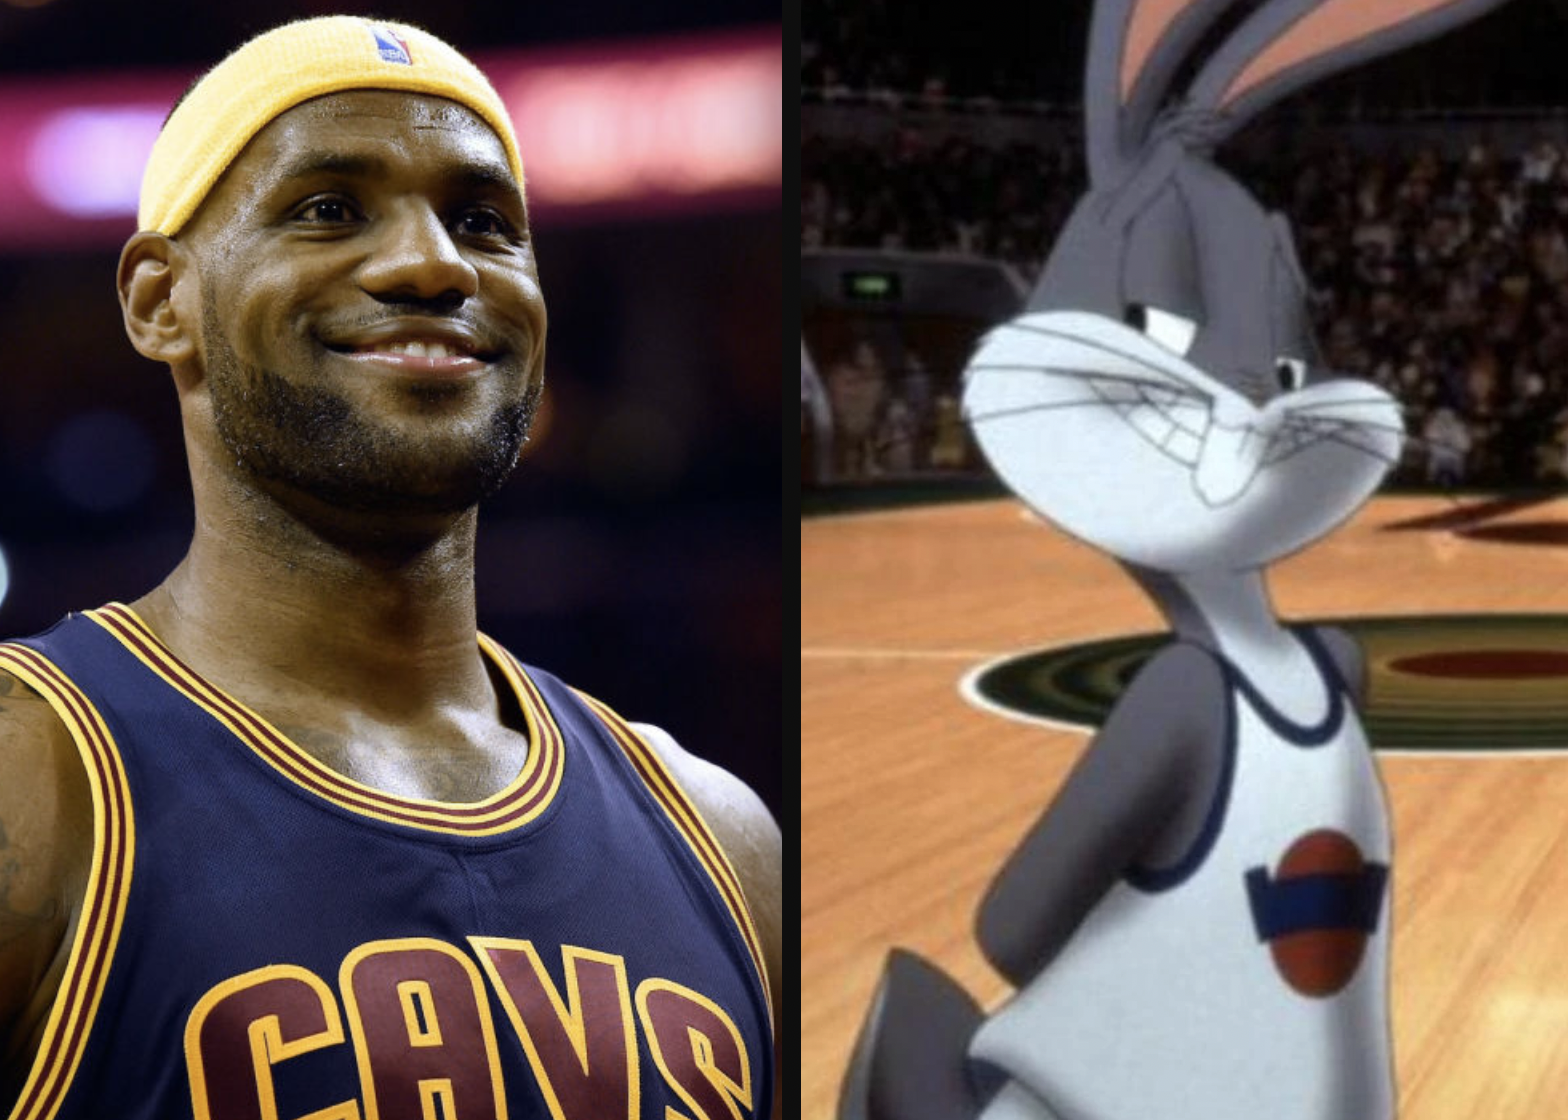 Space Jam 2 starring LeBron James has an official release date